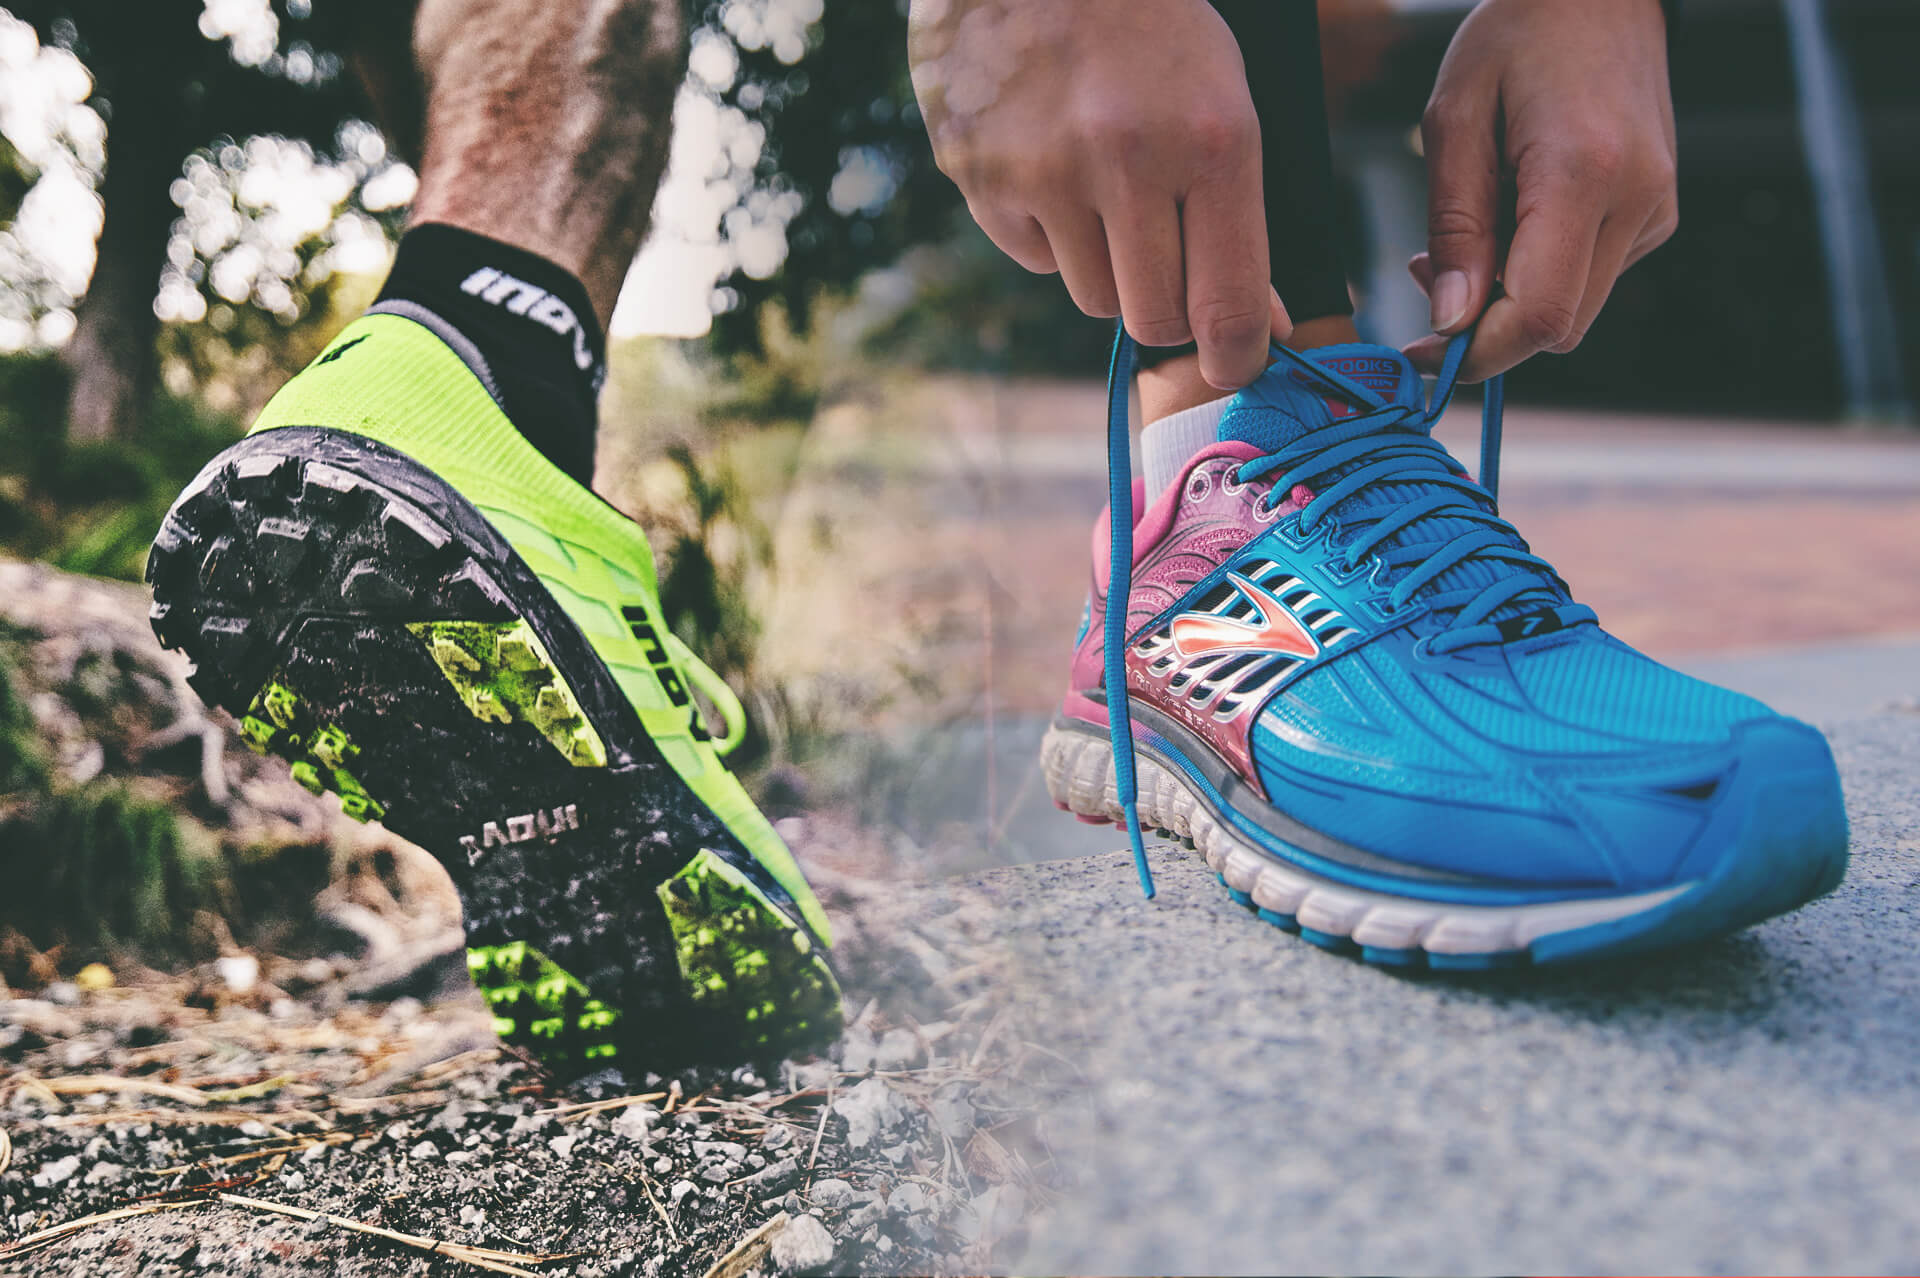 What's the difference between road and trail running shoes?